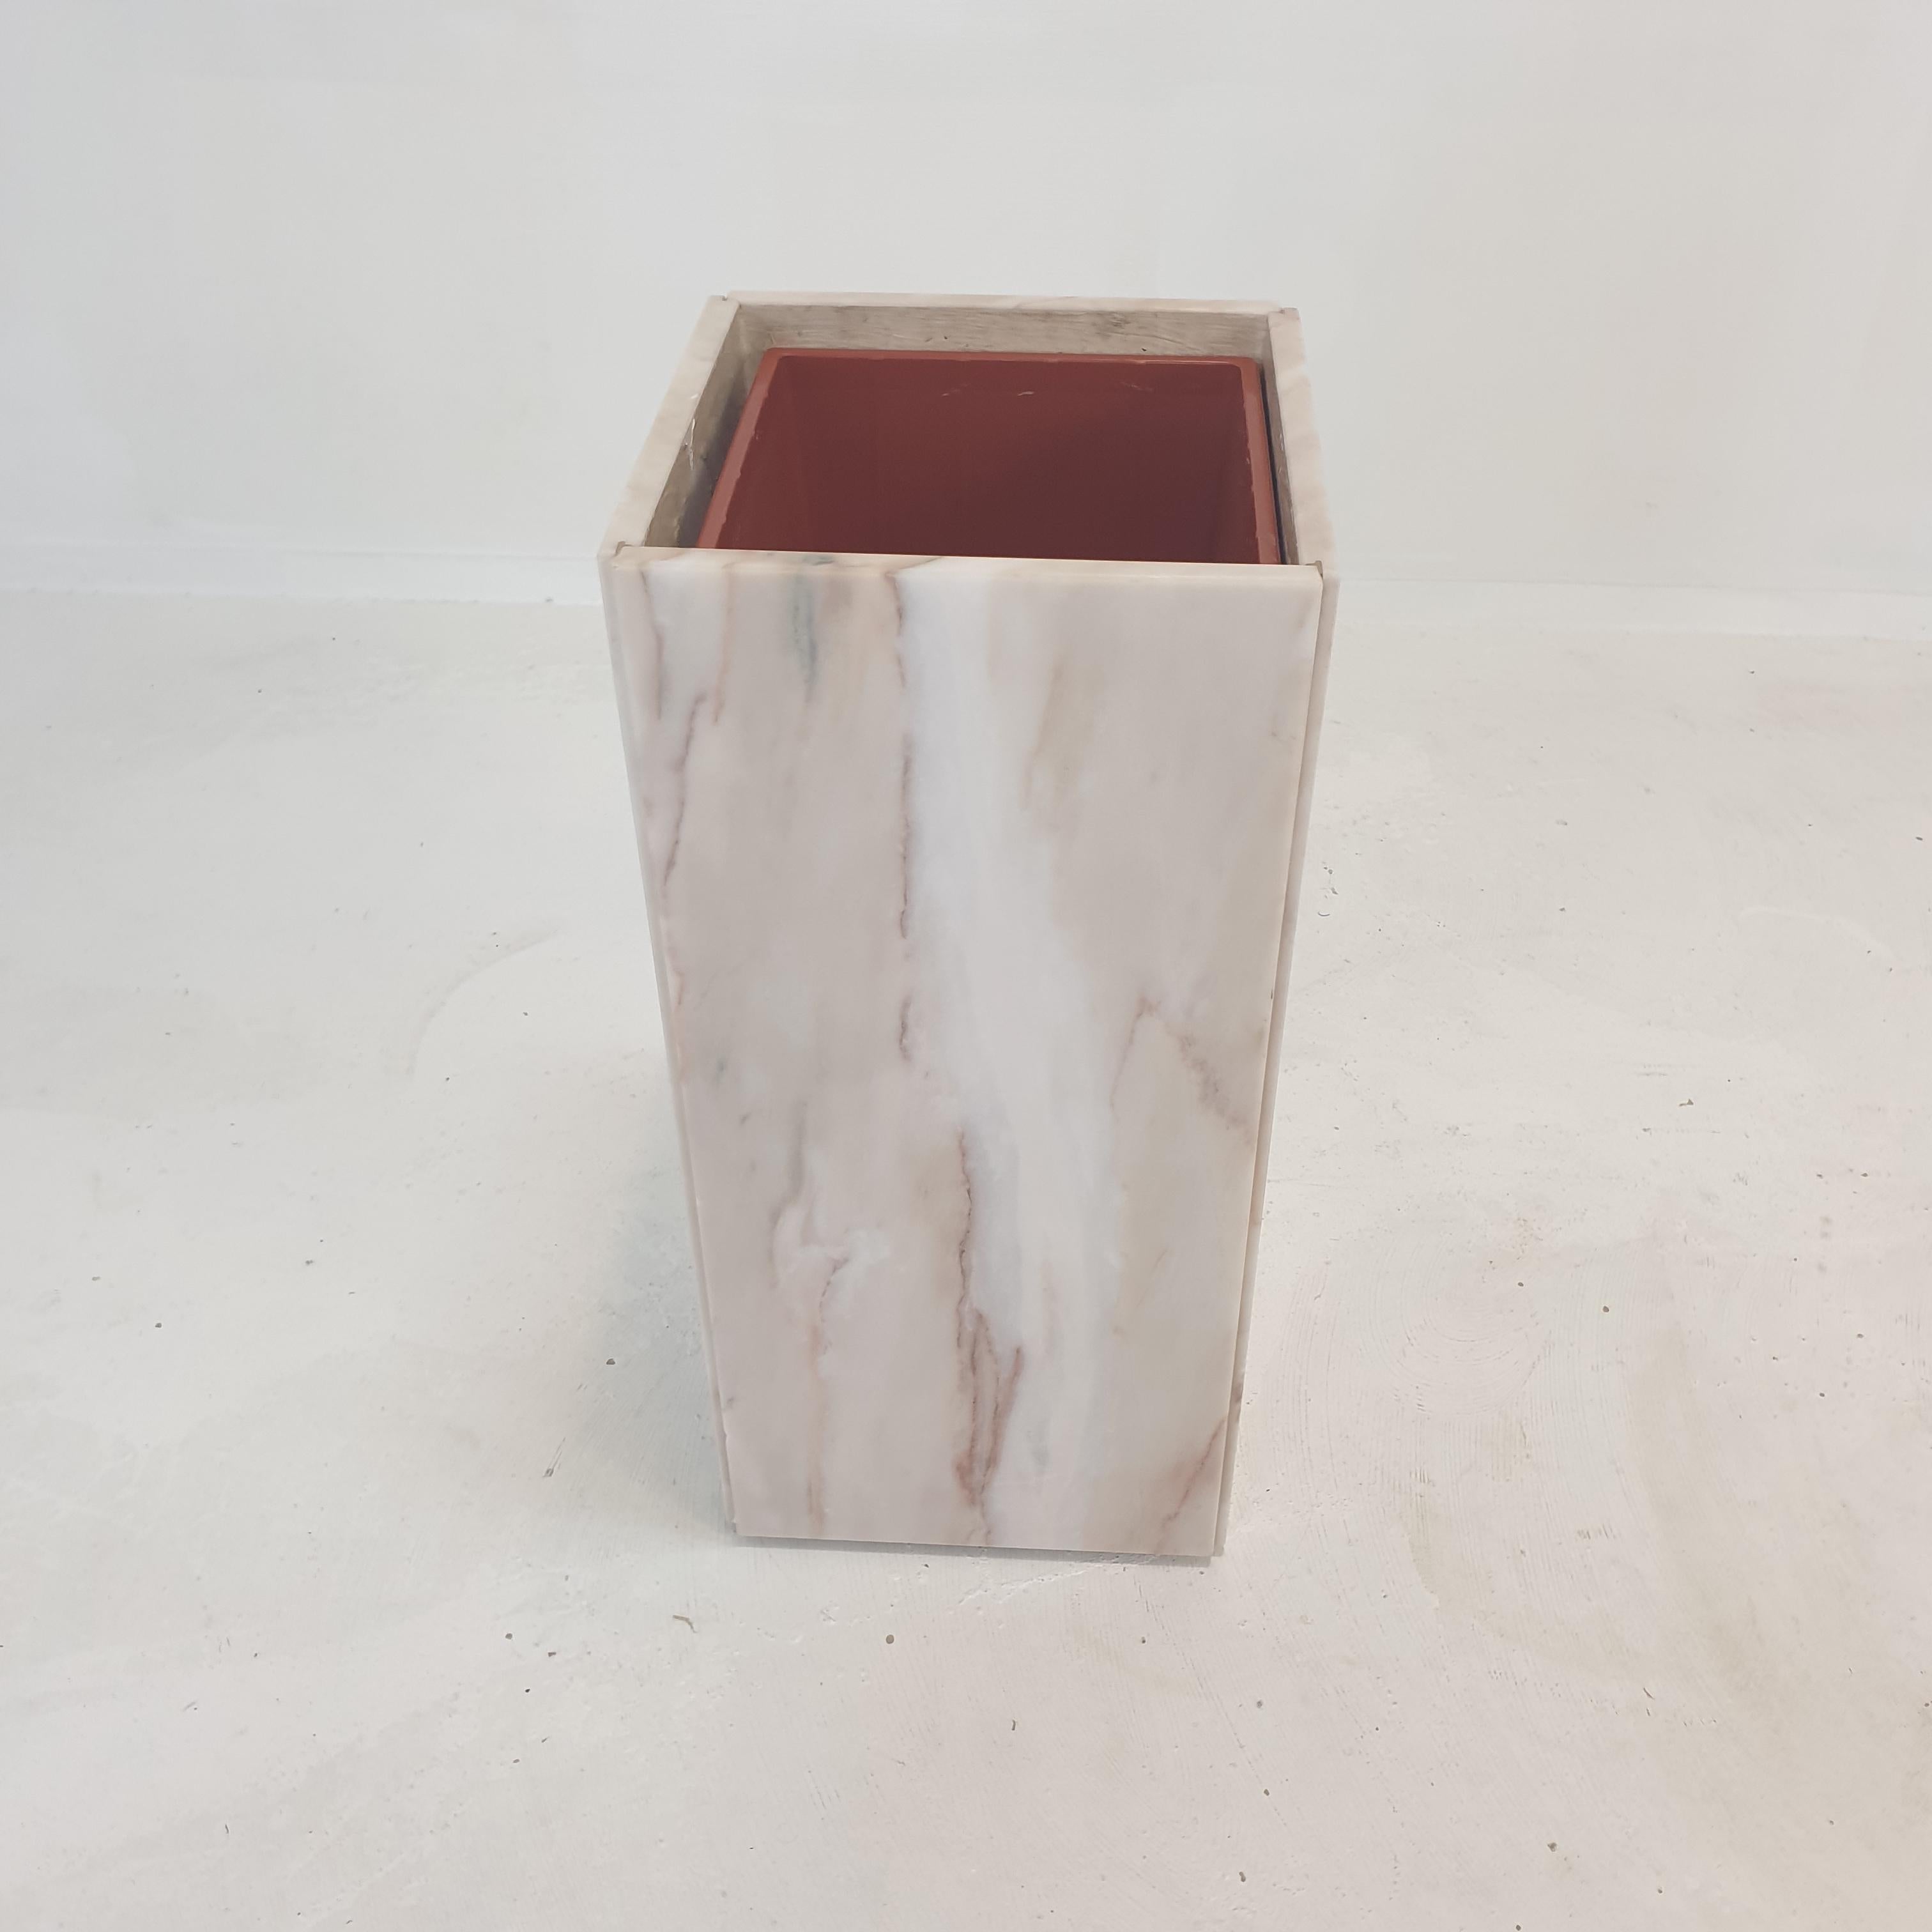 Late 20th Century Italian Marble Planter or Pedestal with Light, 1970's For Sale